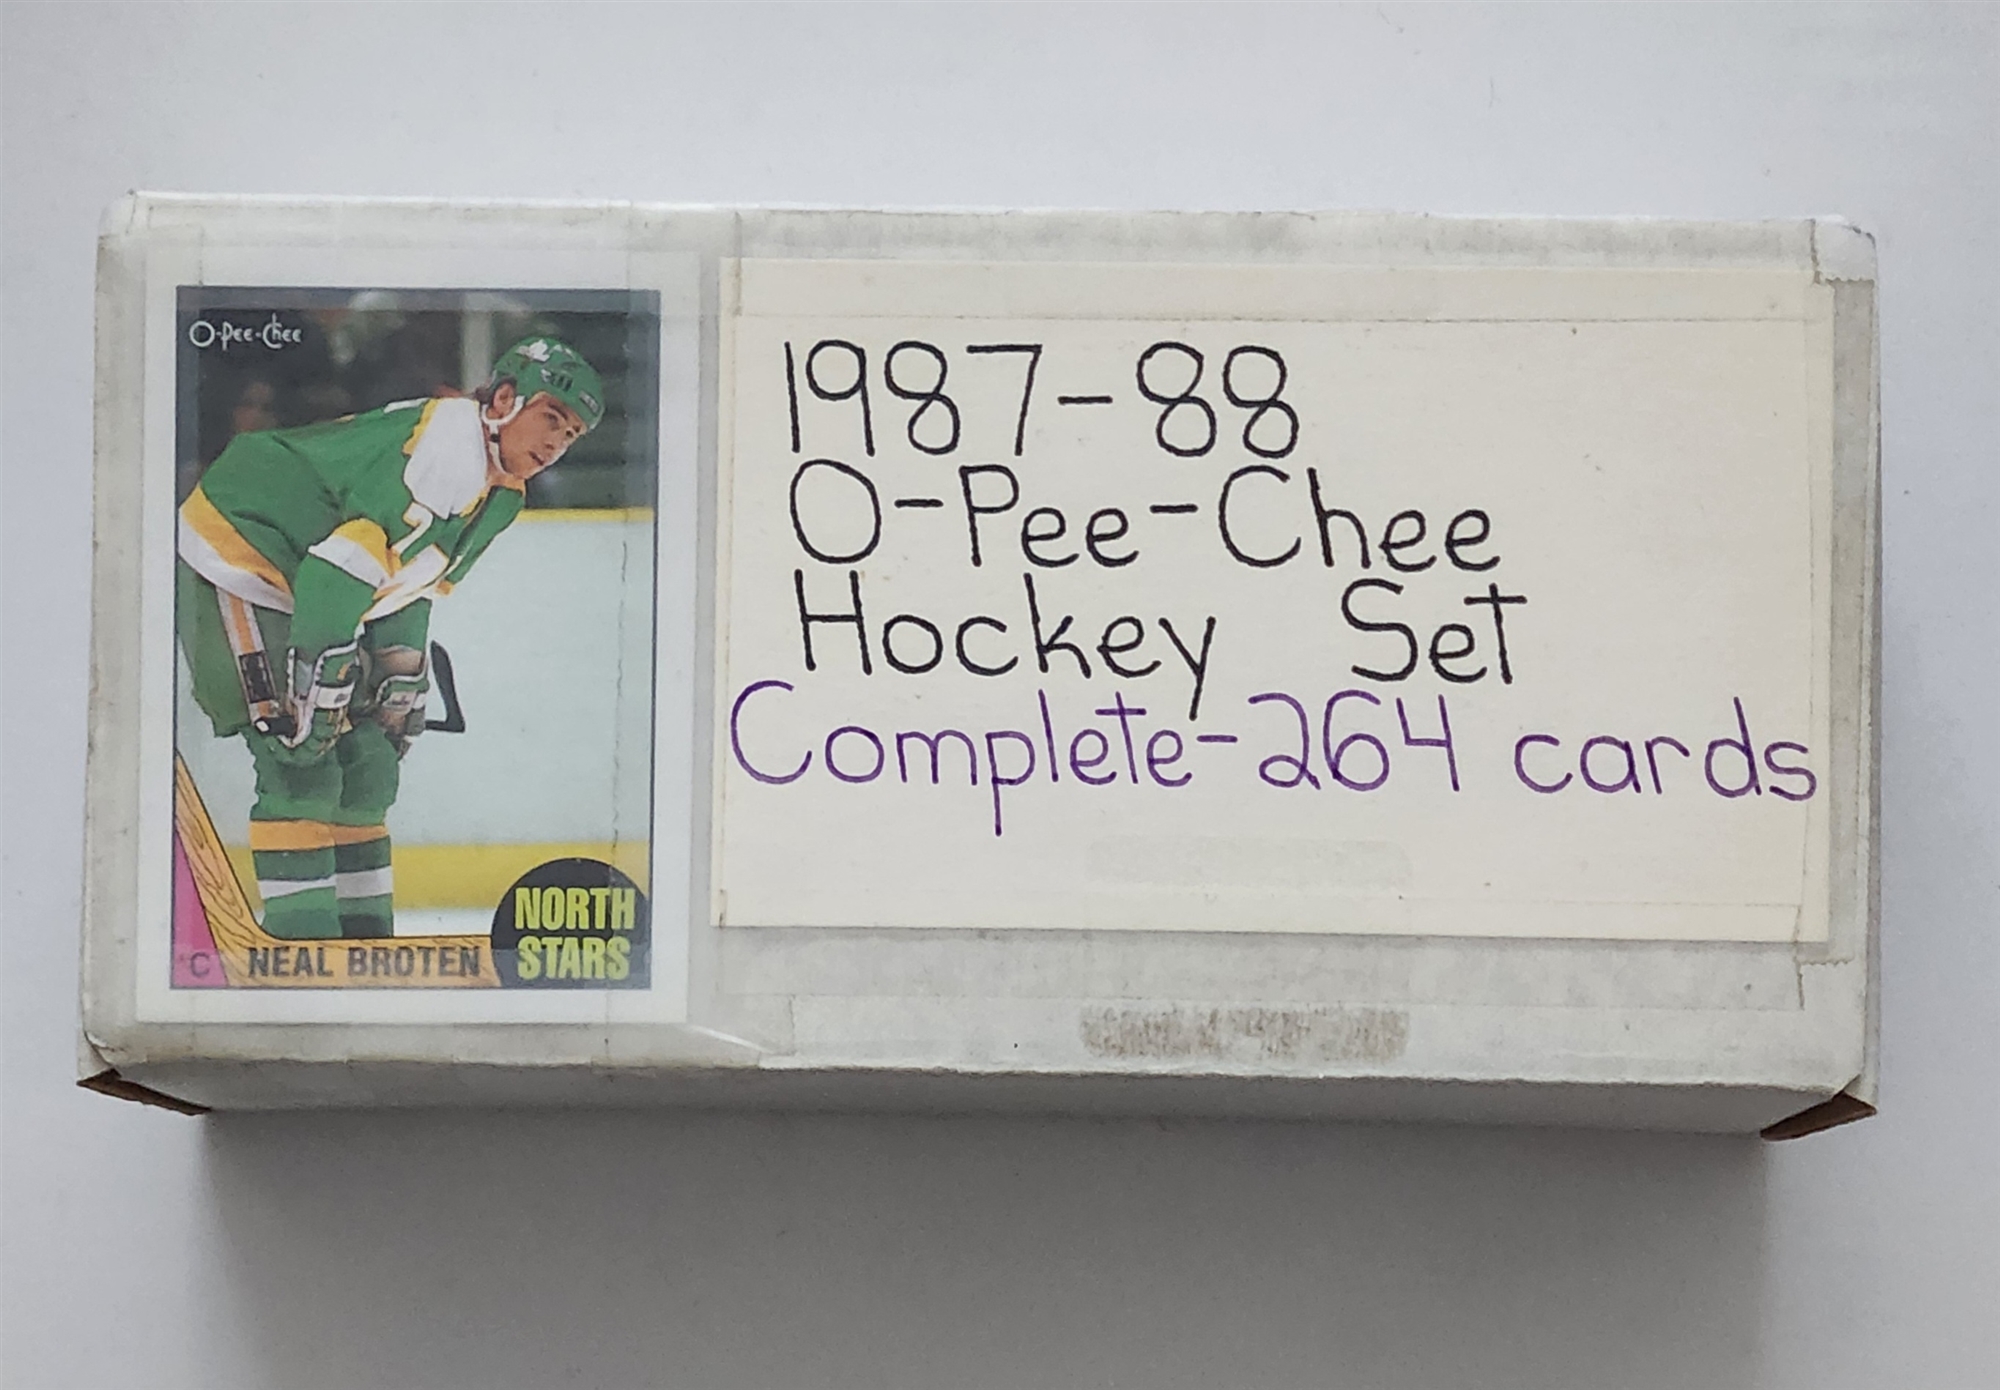 1987-88 O-Pee-Chee Hockey Complete Set With Robitaille & Oates Rookies